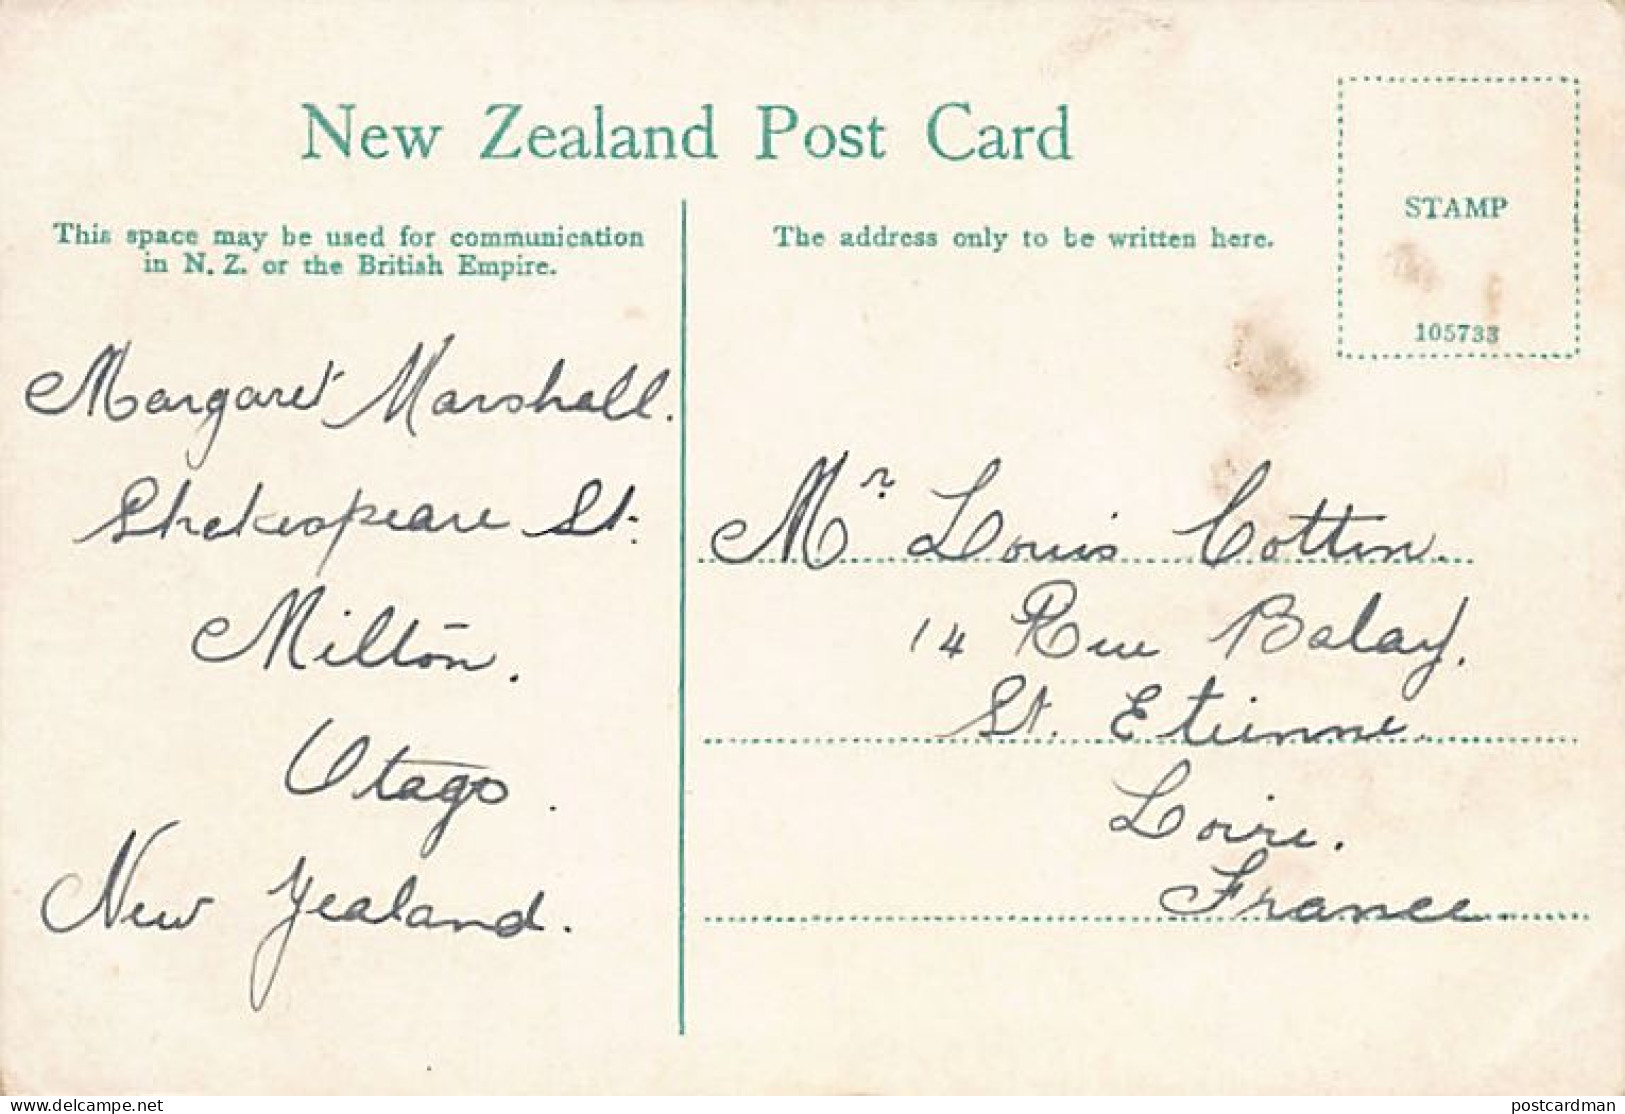 New Zealand - Andersons Bay From Mornington - Publ. Unknown  - Neuseeland